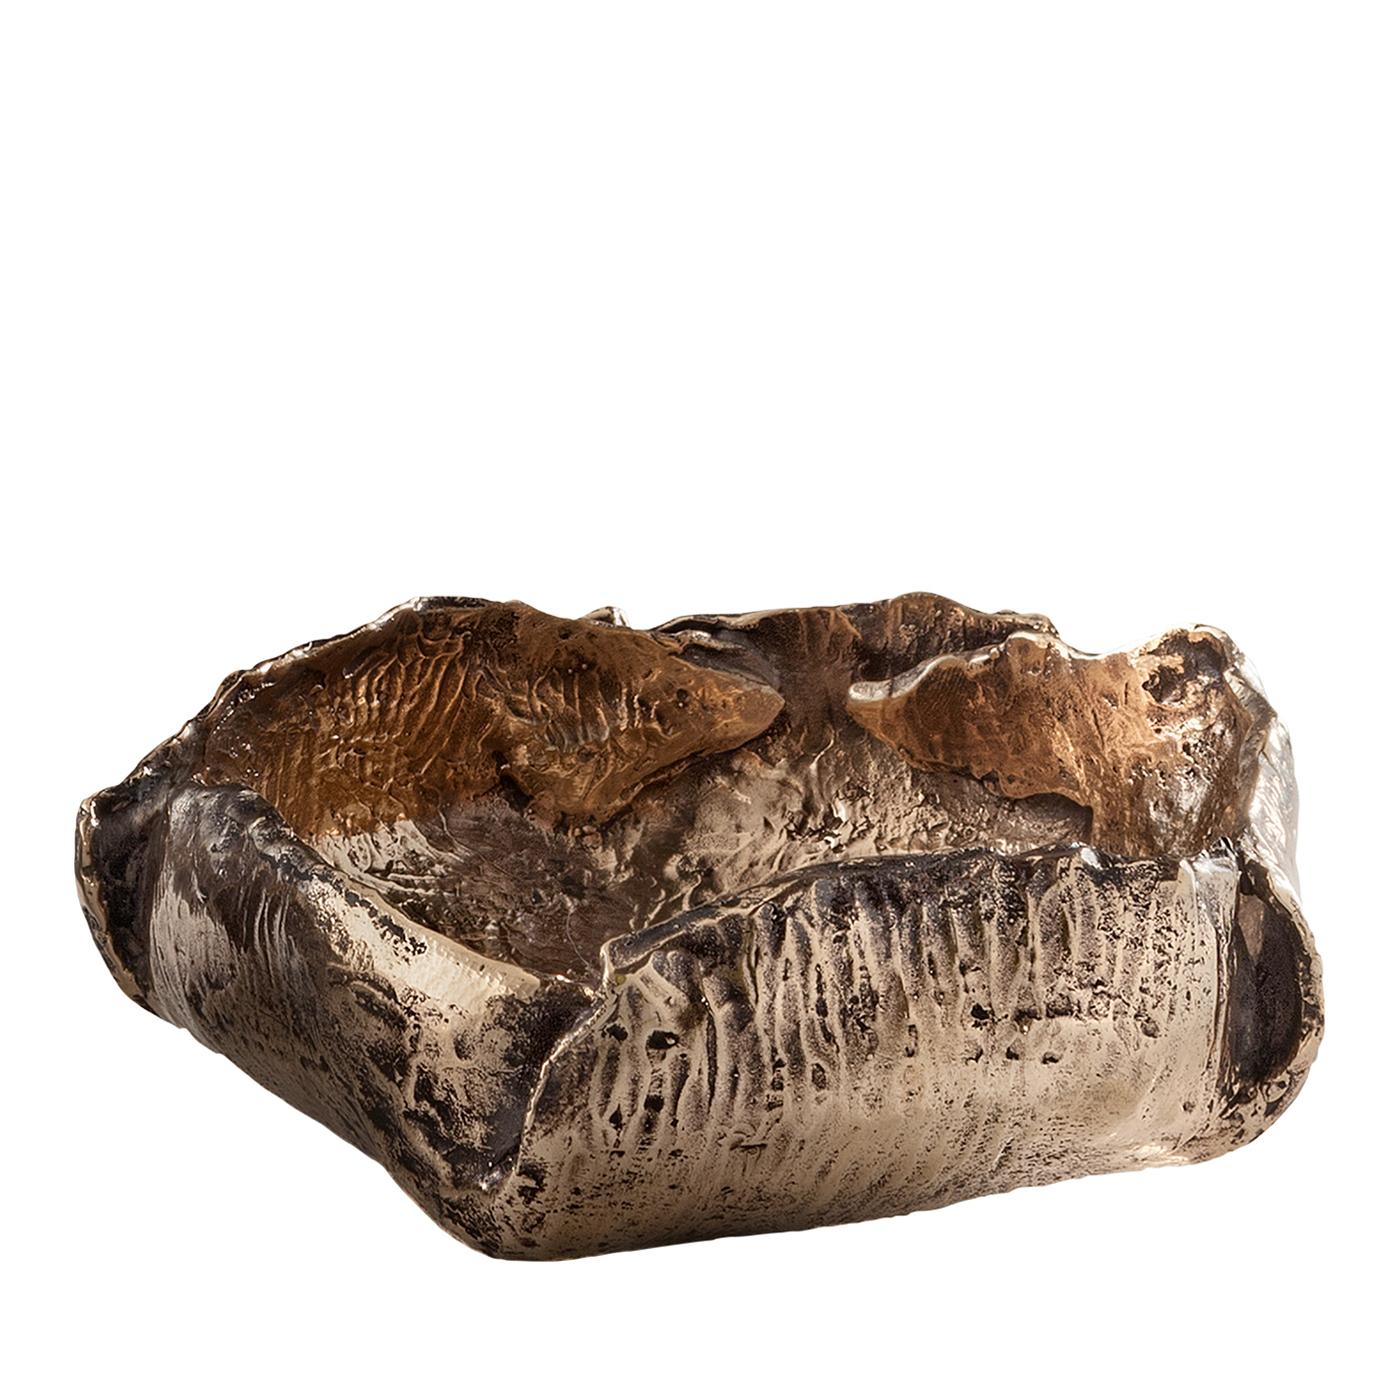 Unusual bronze bowl handcrafted by Osanna Visconti using the traditional lost-wax casting technique. Misshapen and fragmented, this signature décor piece resembles a coral reef or fossil due to its unusual forms, textures, and varying shades of